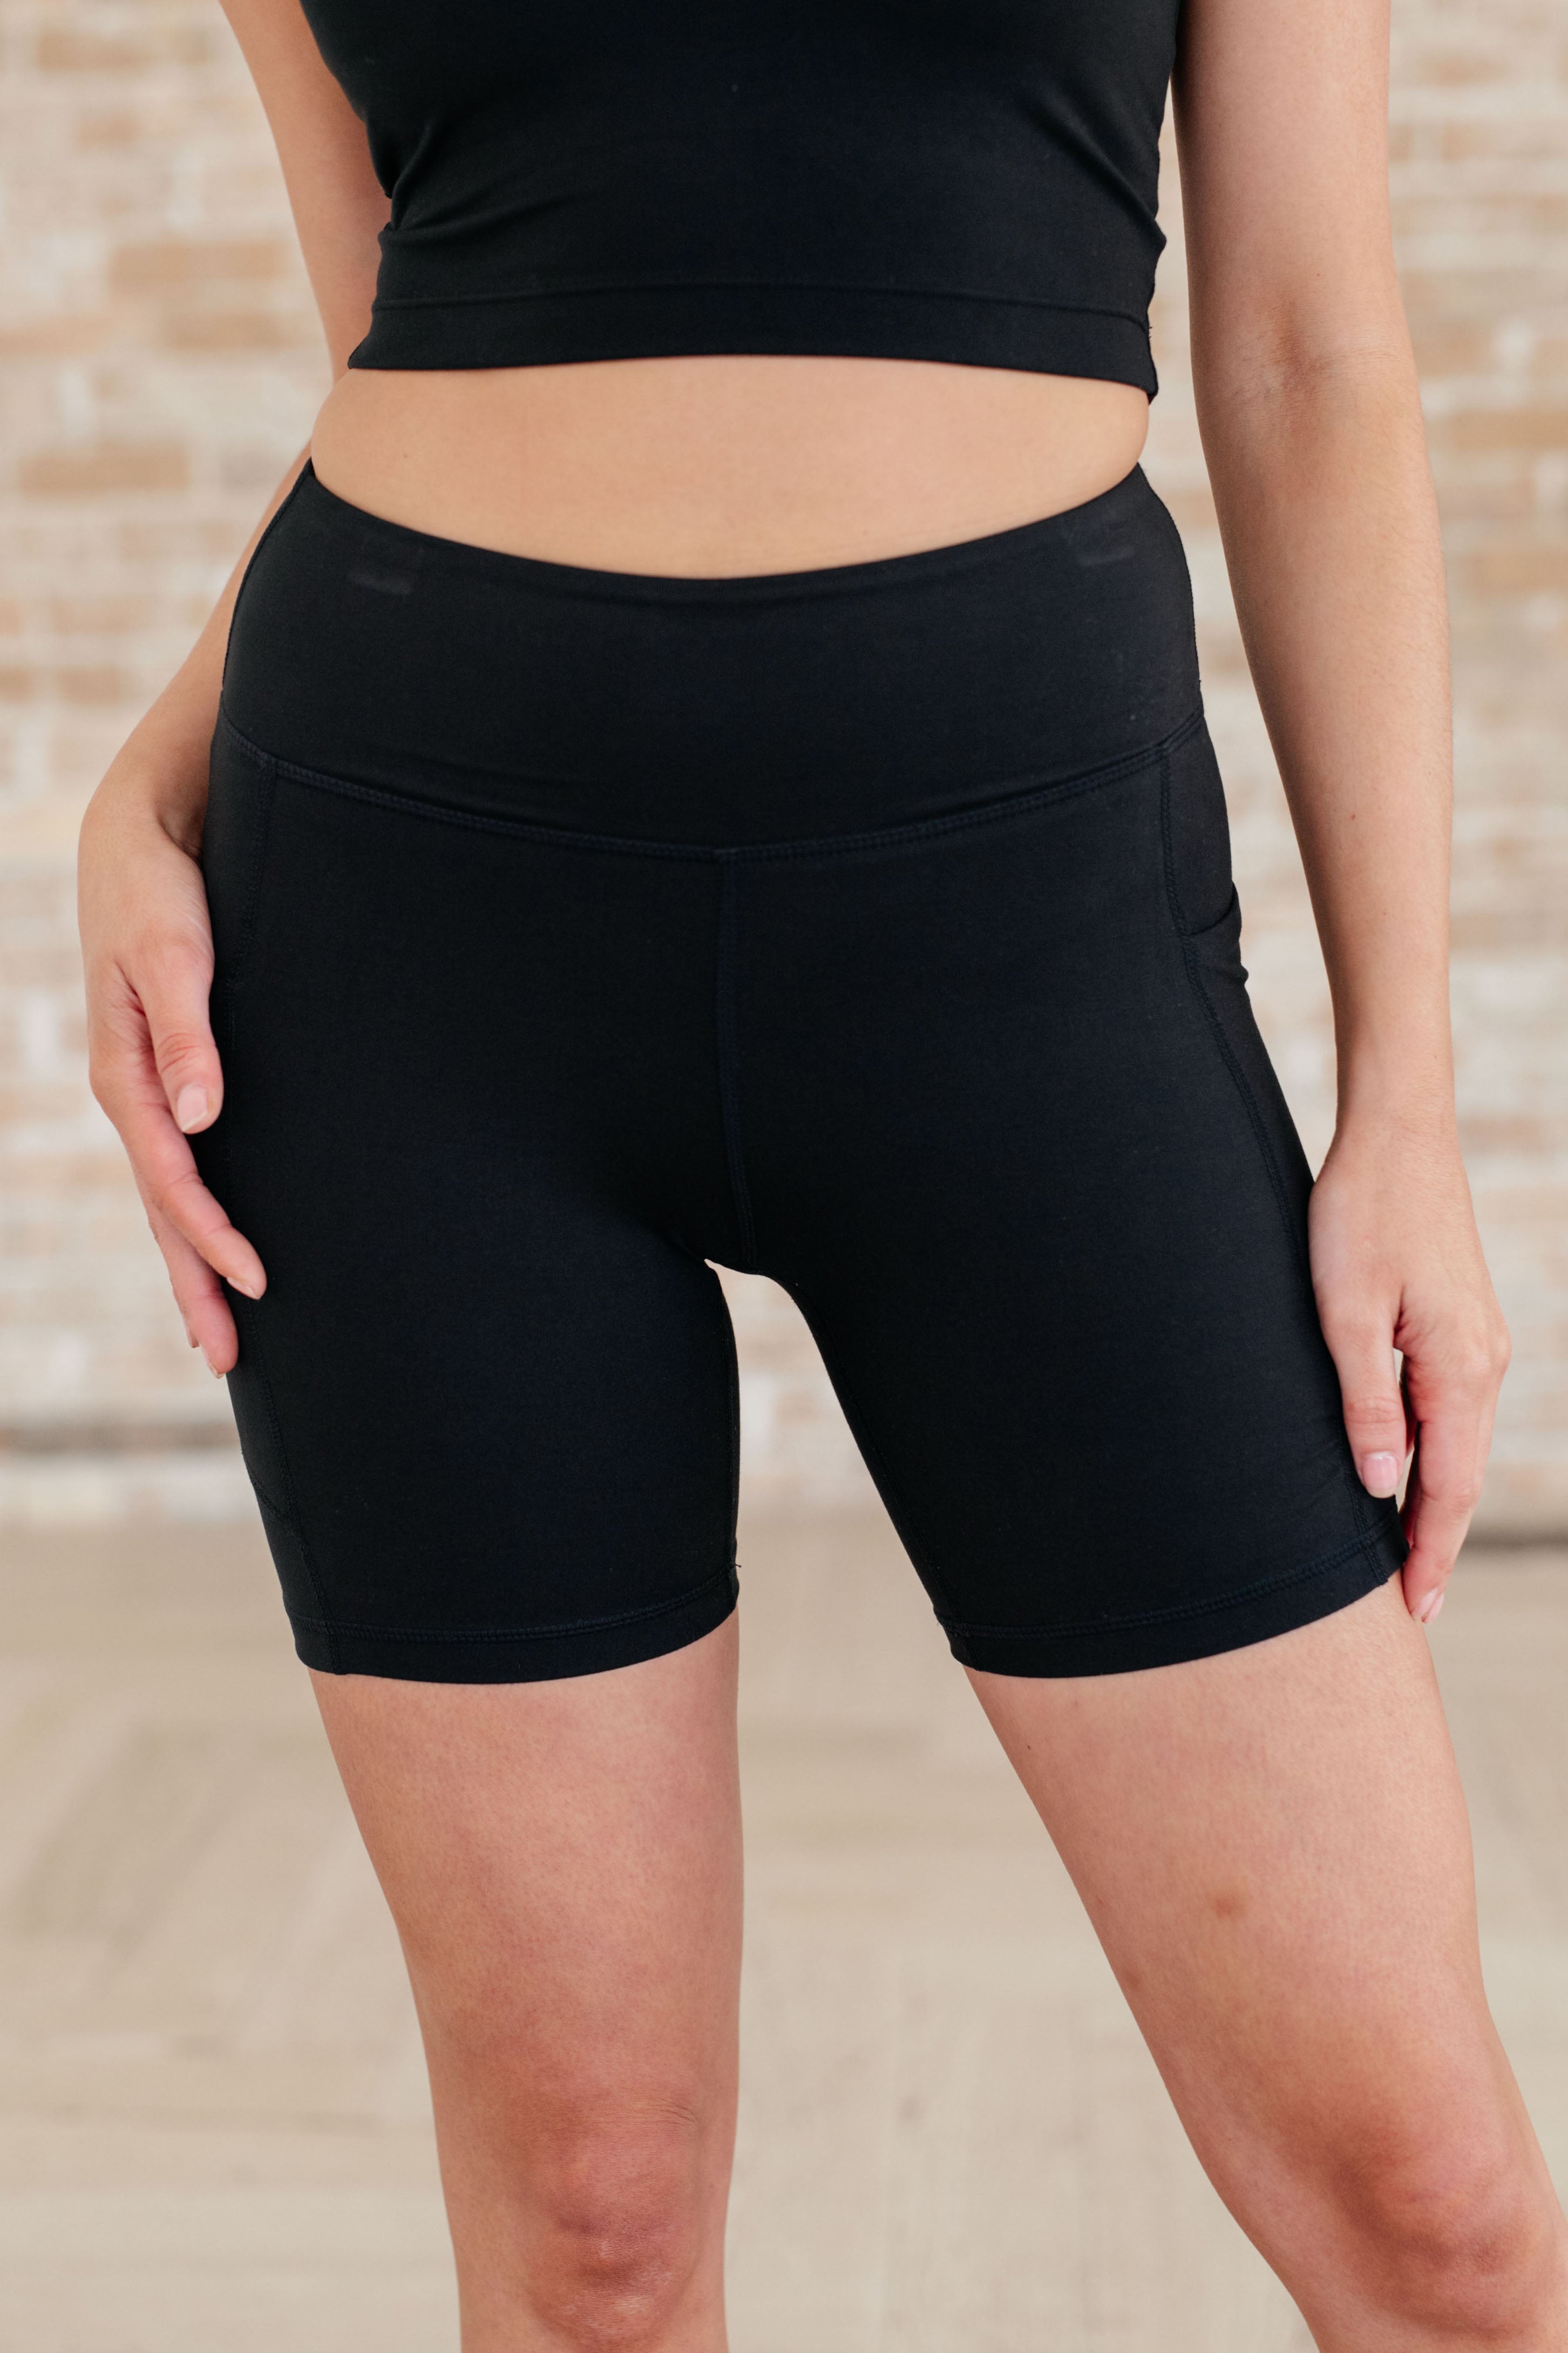 Getting Active Biker Shorts in Black Athleisure Ave Shops   